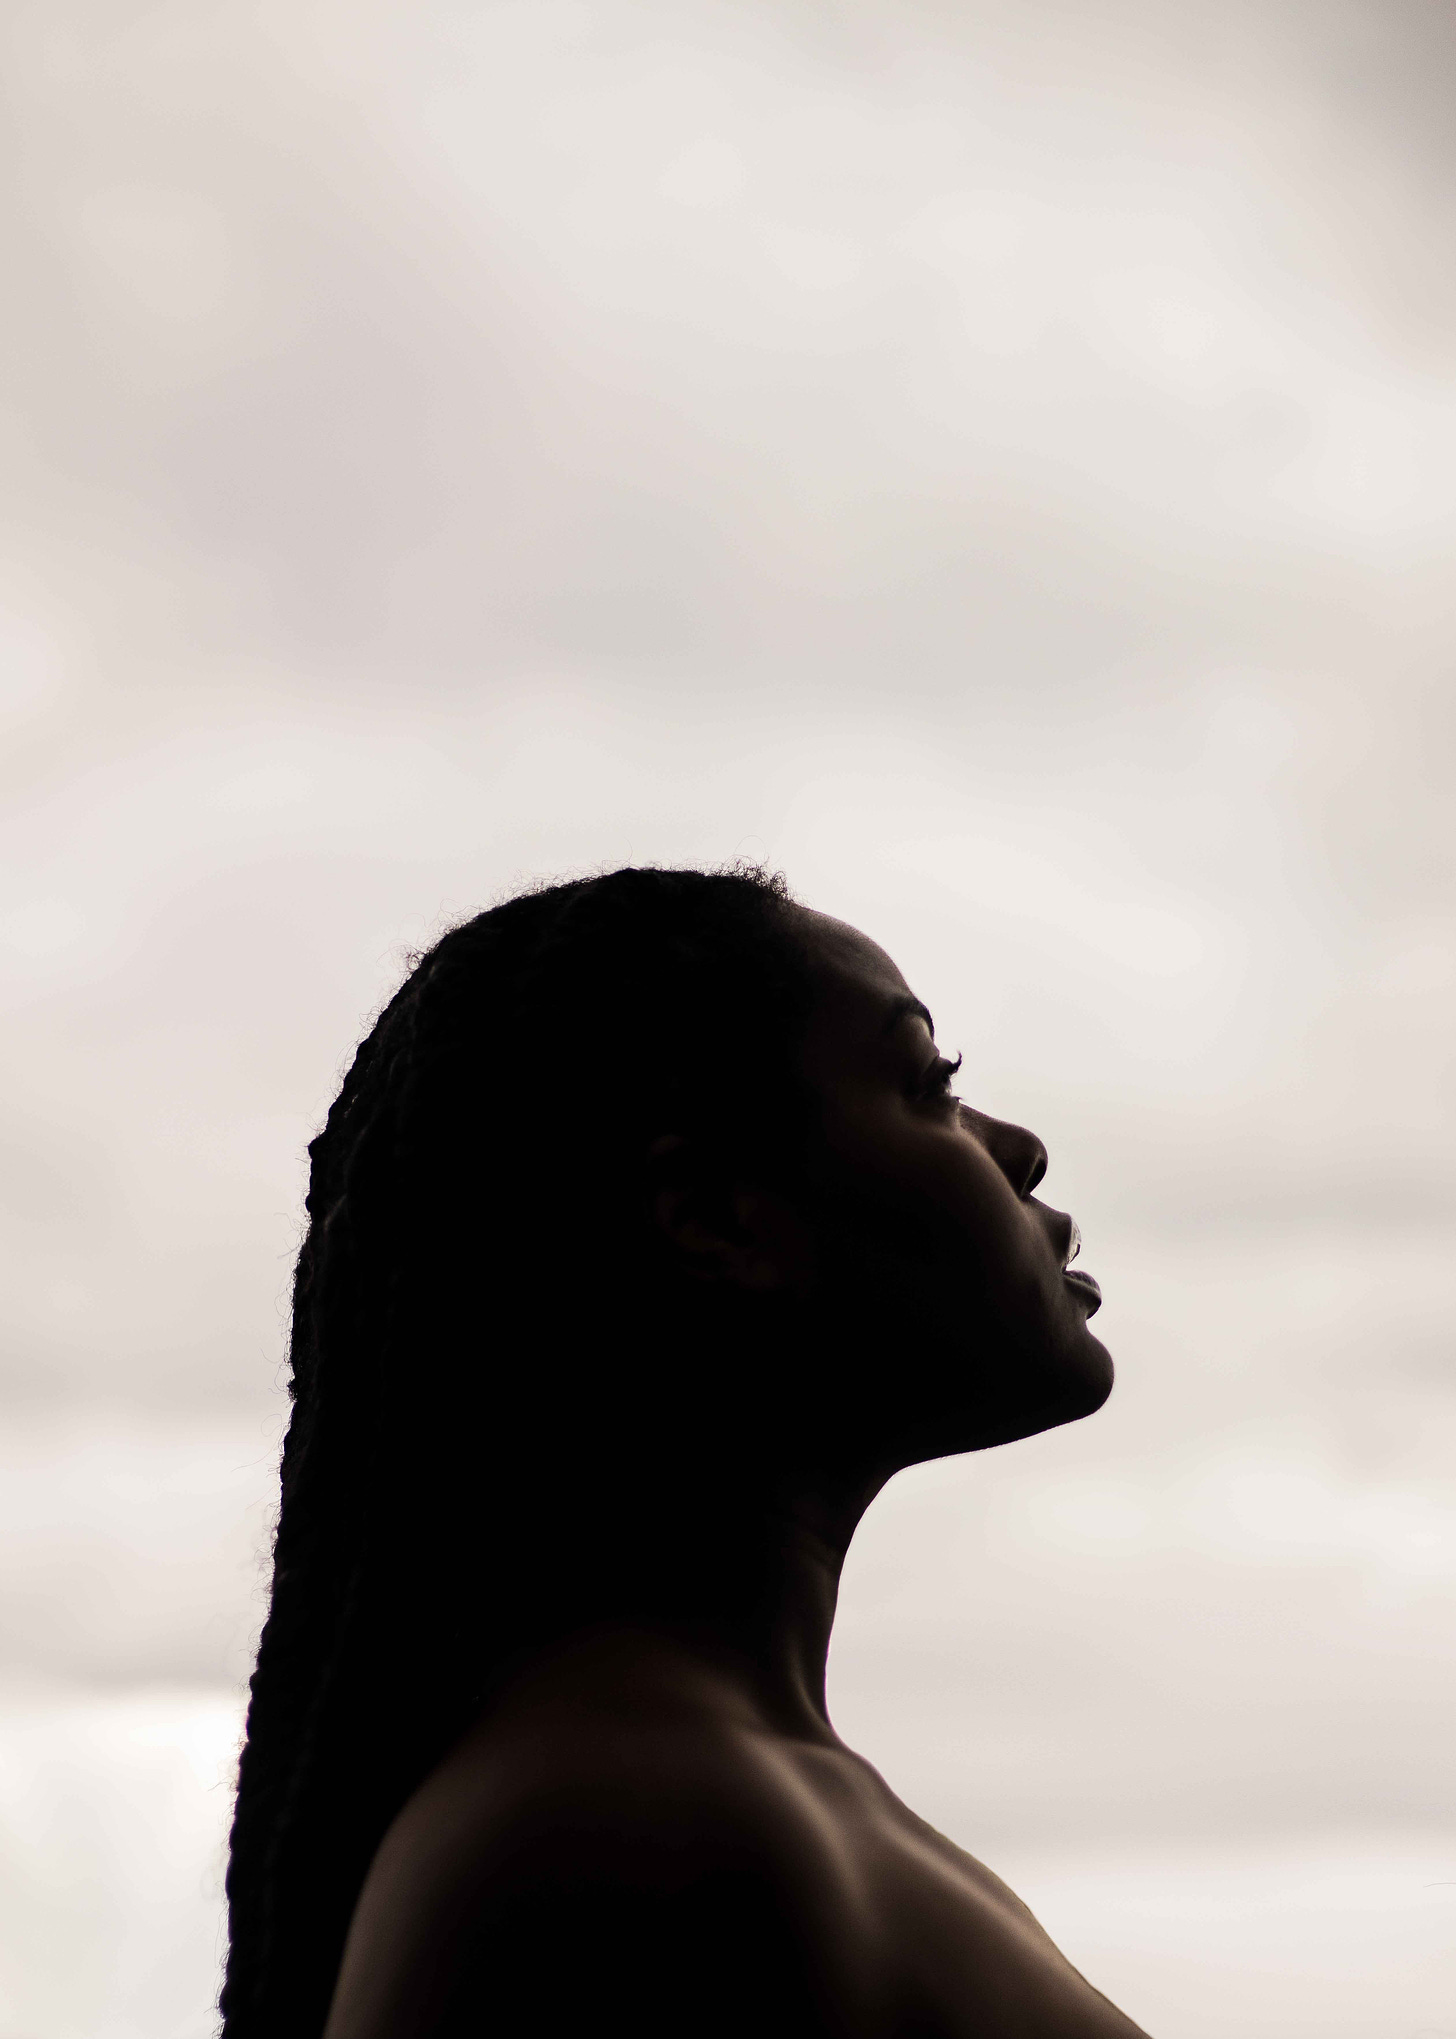 Silhouette of a Black women against a gray sky